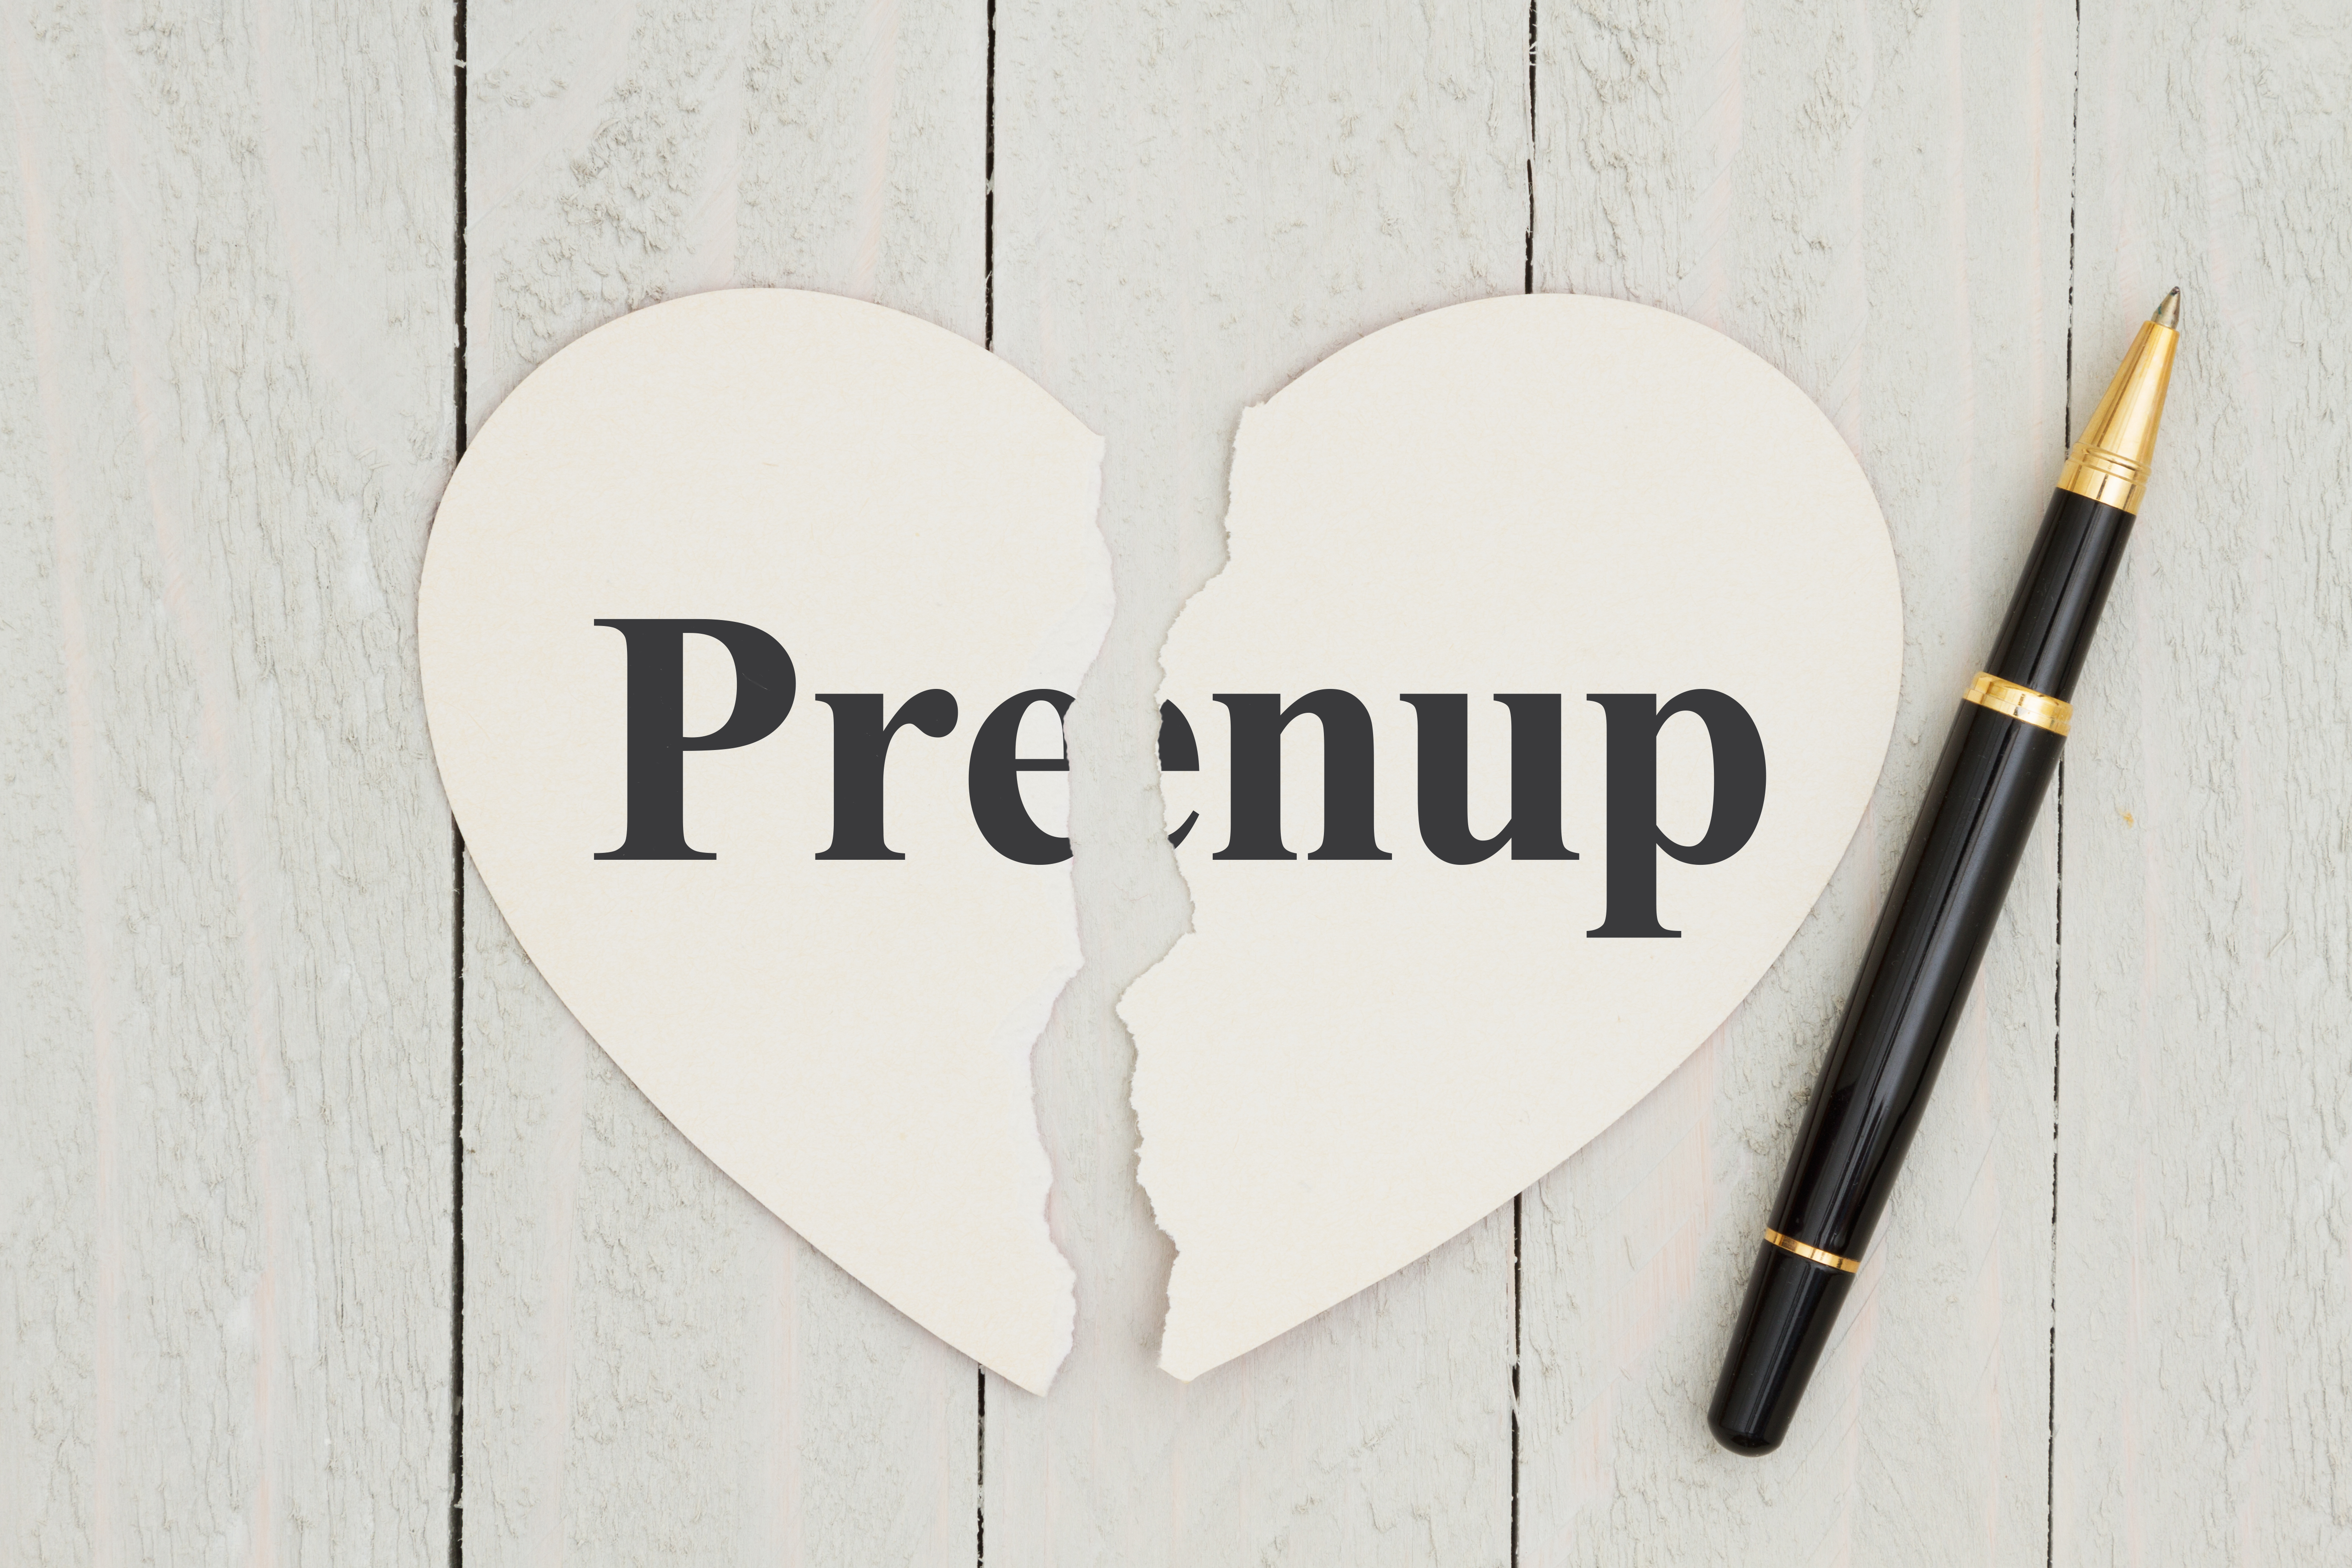 Short relationship results in no property adjustment for wife Husband regrets not getting that Pre-Nup